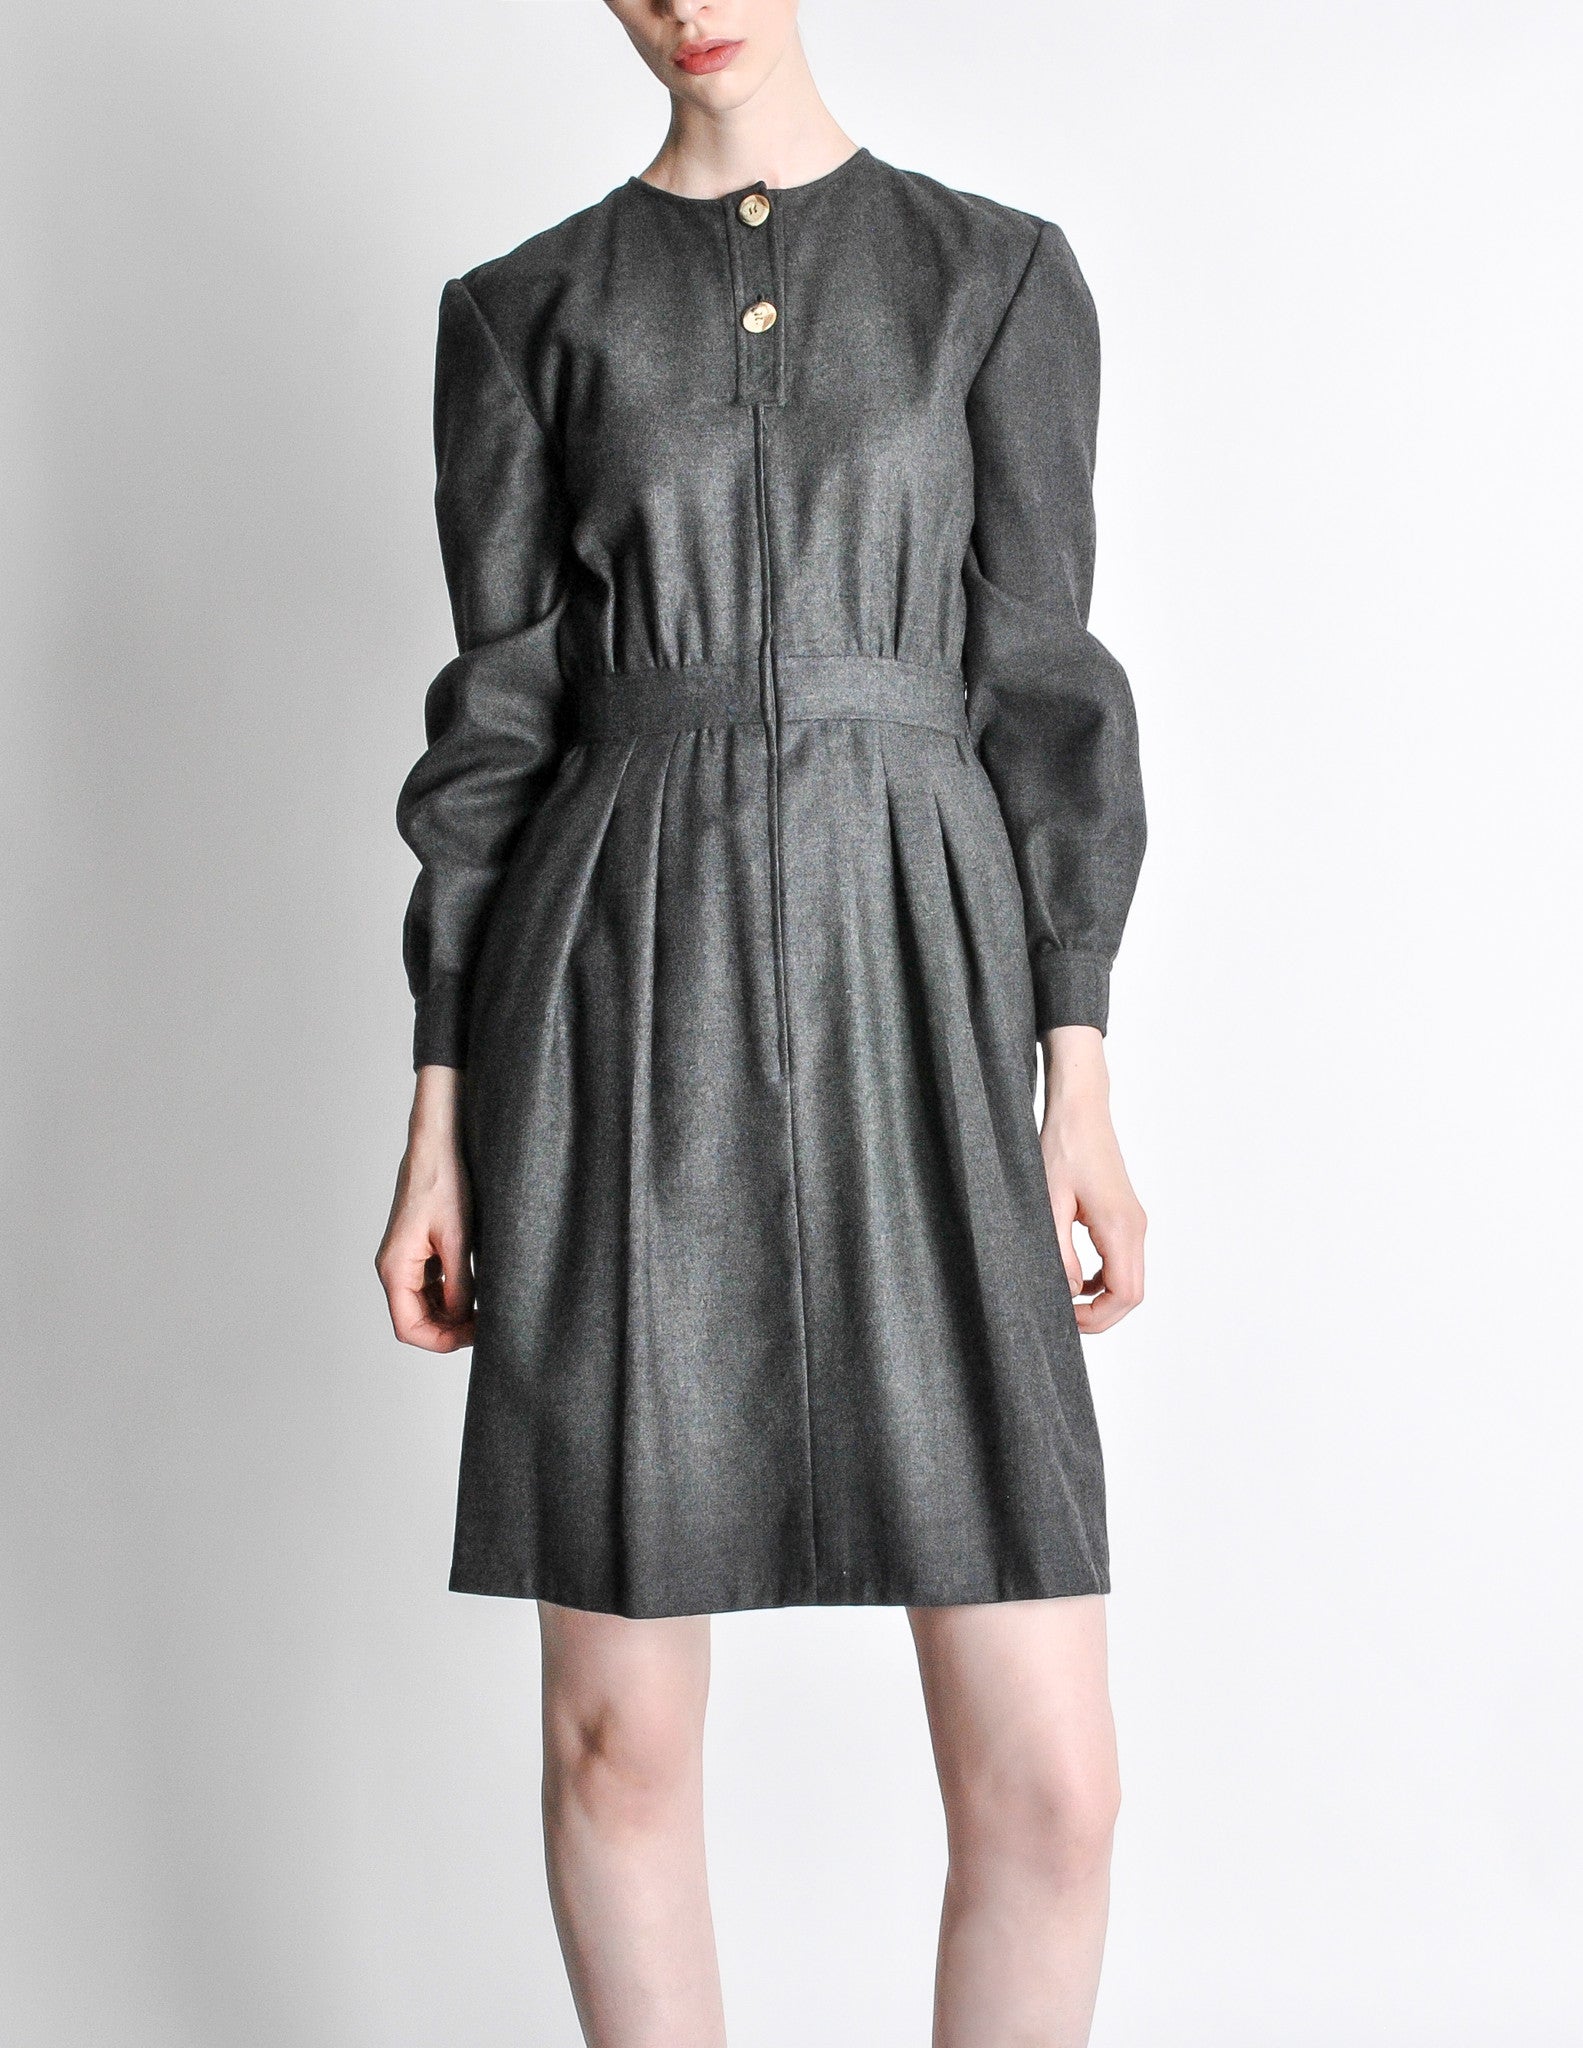 Valentino Vintage Charcoal Grey Wool Dress - from Amarcord Vintage Fashion